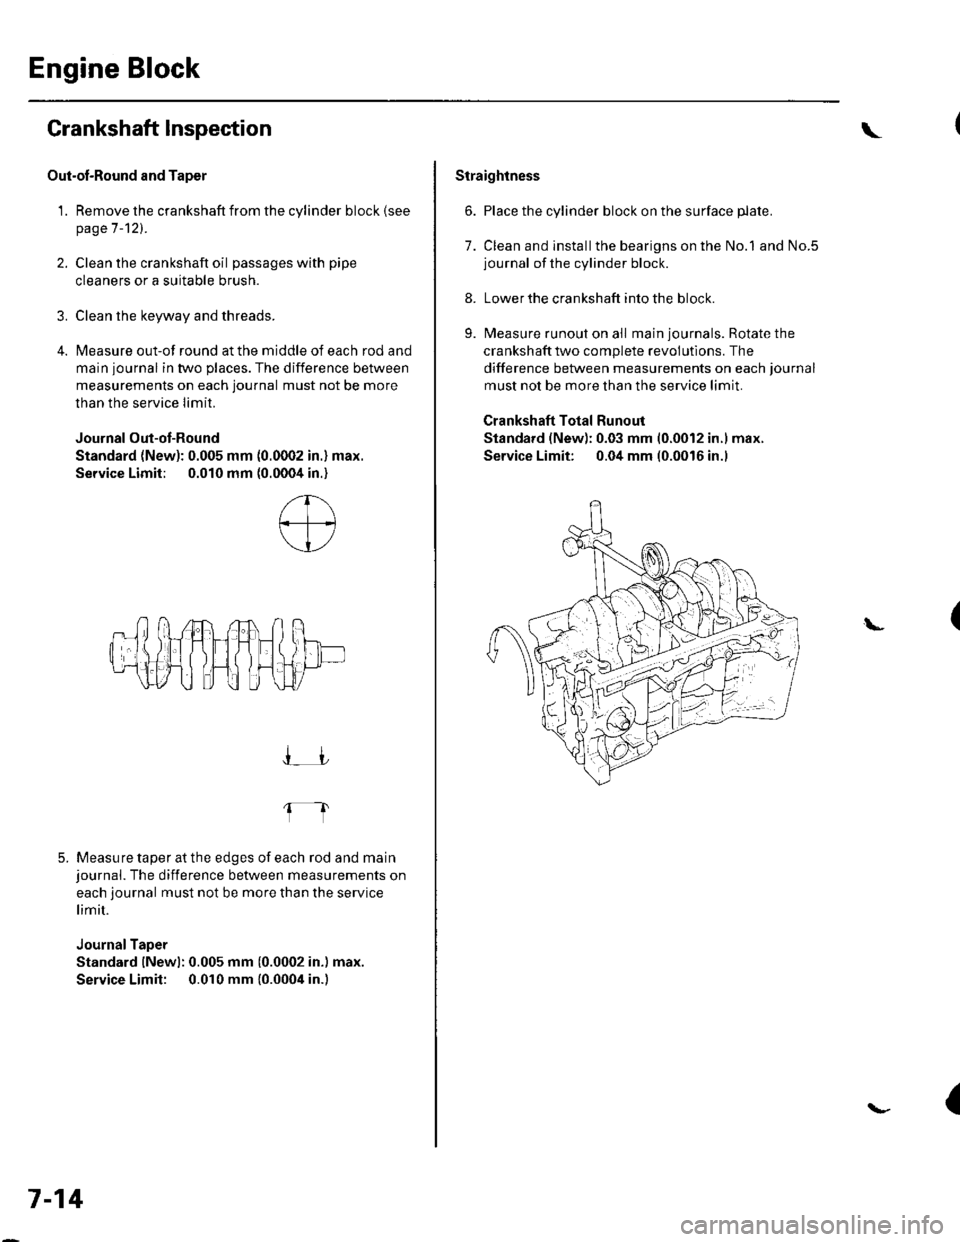 HONDA CIVIC 2003 7.G Service Manual Engine Block
Crankshaft lnspection
Out-ol-Round and Taper
1. Remove the crankshaft from the cylinder block (see
page 7-121.
2. Clean the crankshaft oil passages with pipe
cleaners or a suitable brush.